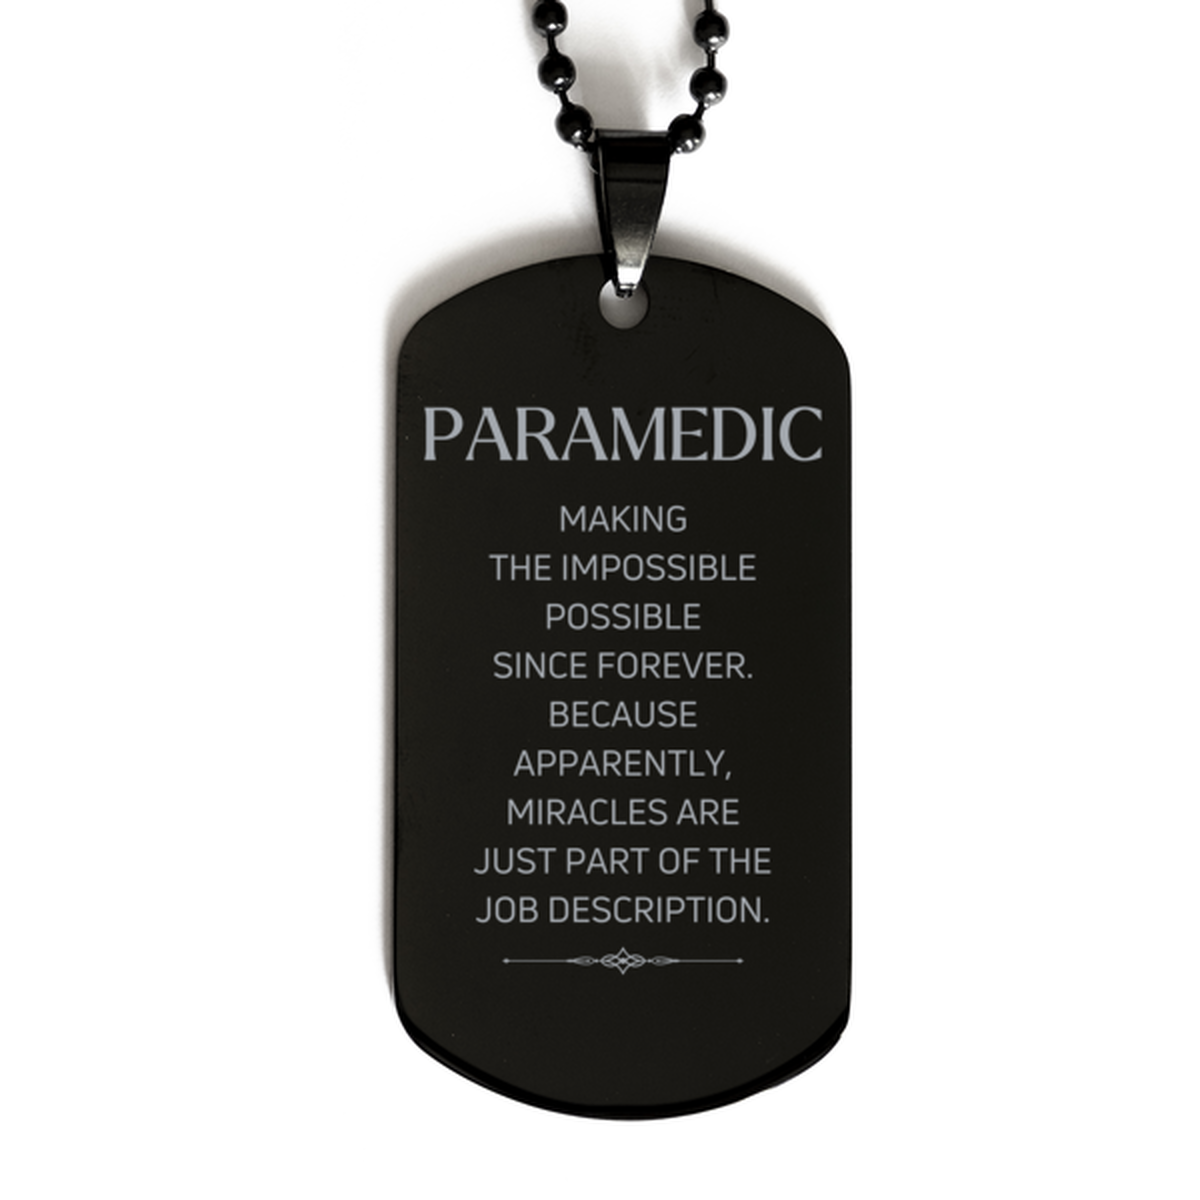 Funny Paramedic Gifts, Miracles are just part of the job description, Inspirational Birthday Black Dog Tag For Paramedic, Men, Women, Coworkers, Friends, Boss